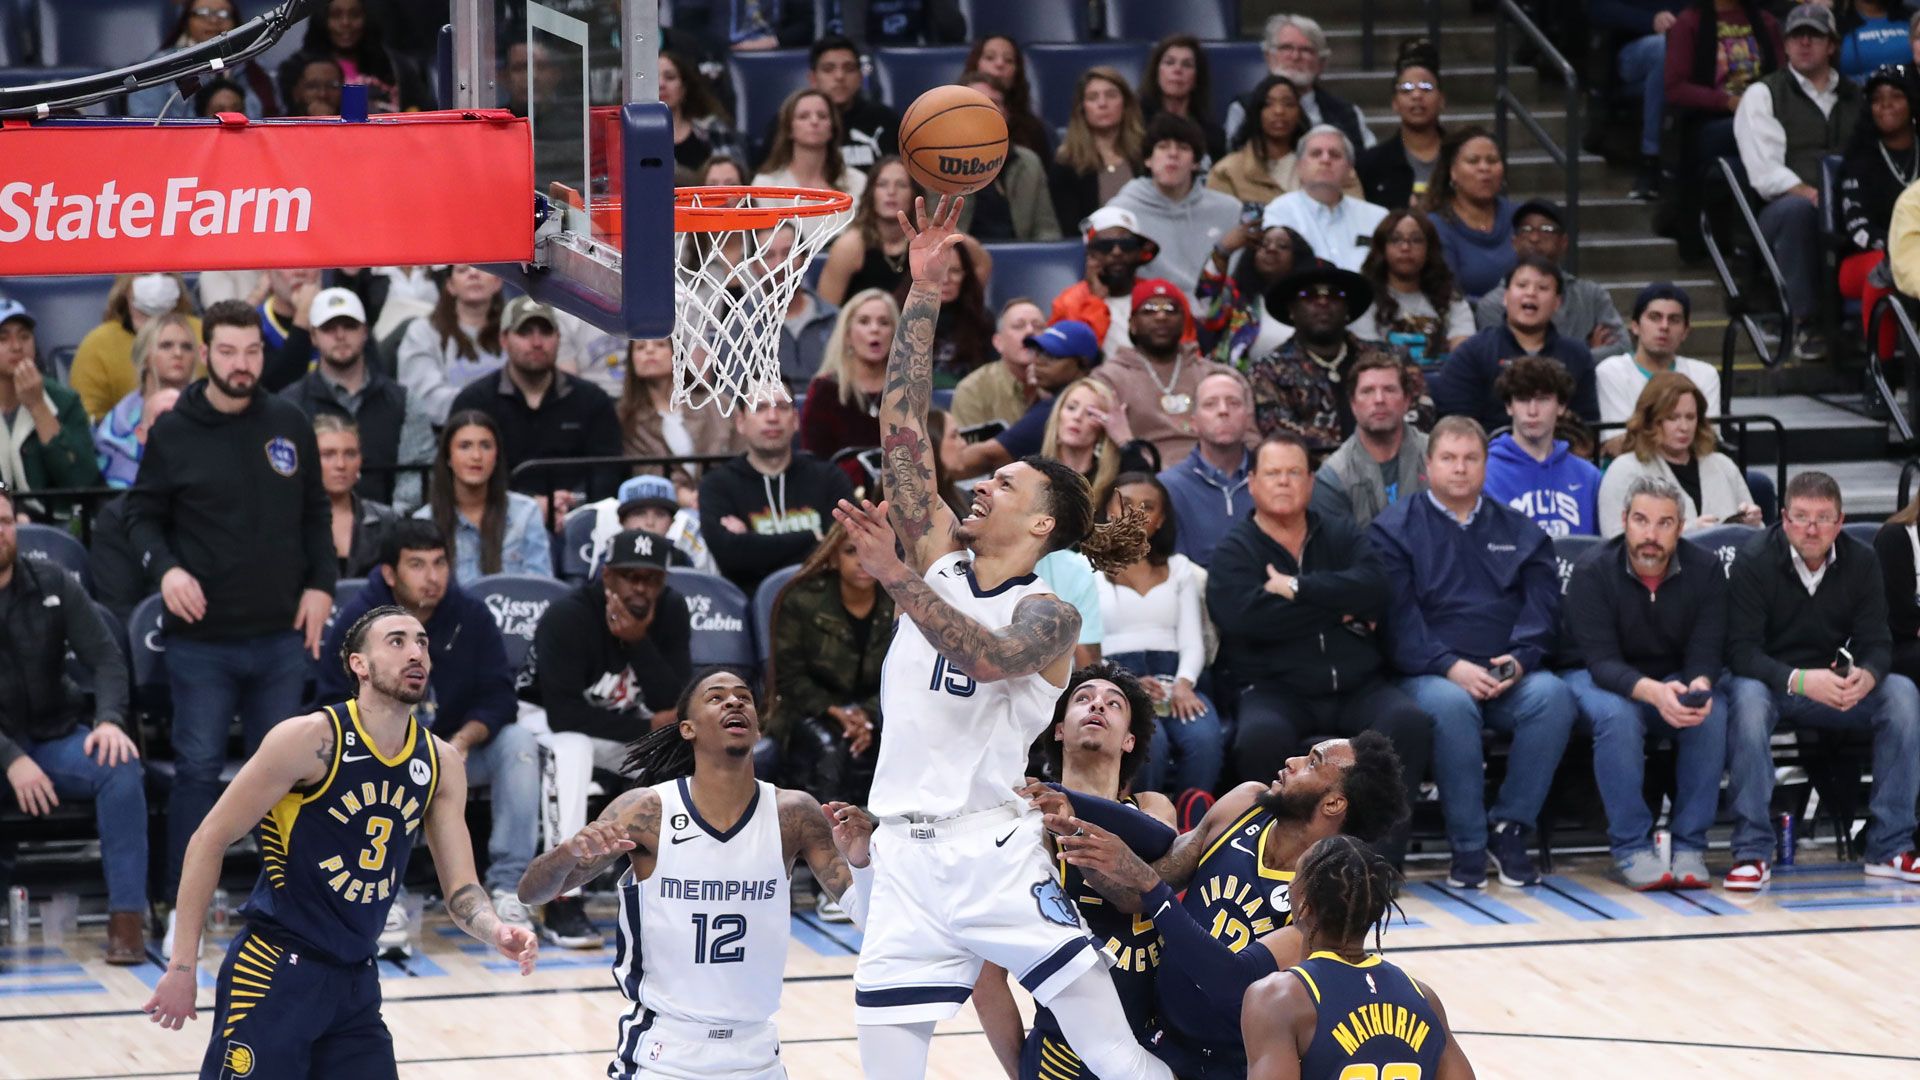 MEMPHIS, TN - JANUARY 29: Brandon Clarke #15 of the Memphis Grizzlies drives to the basket during the game against the Indiana Pacers on January 29, 2023 at FedExForum in Memphis, Tennessee.